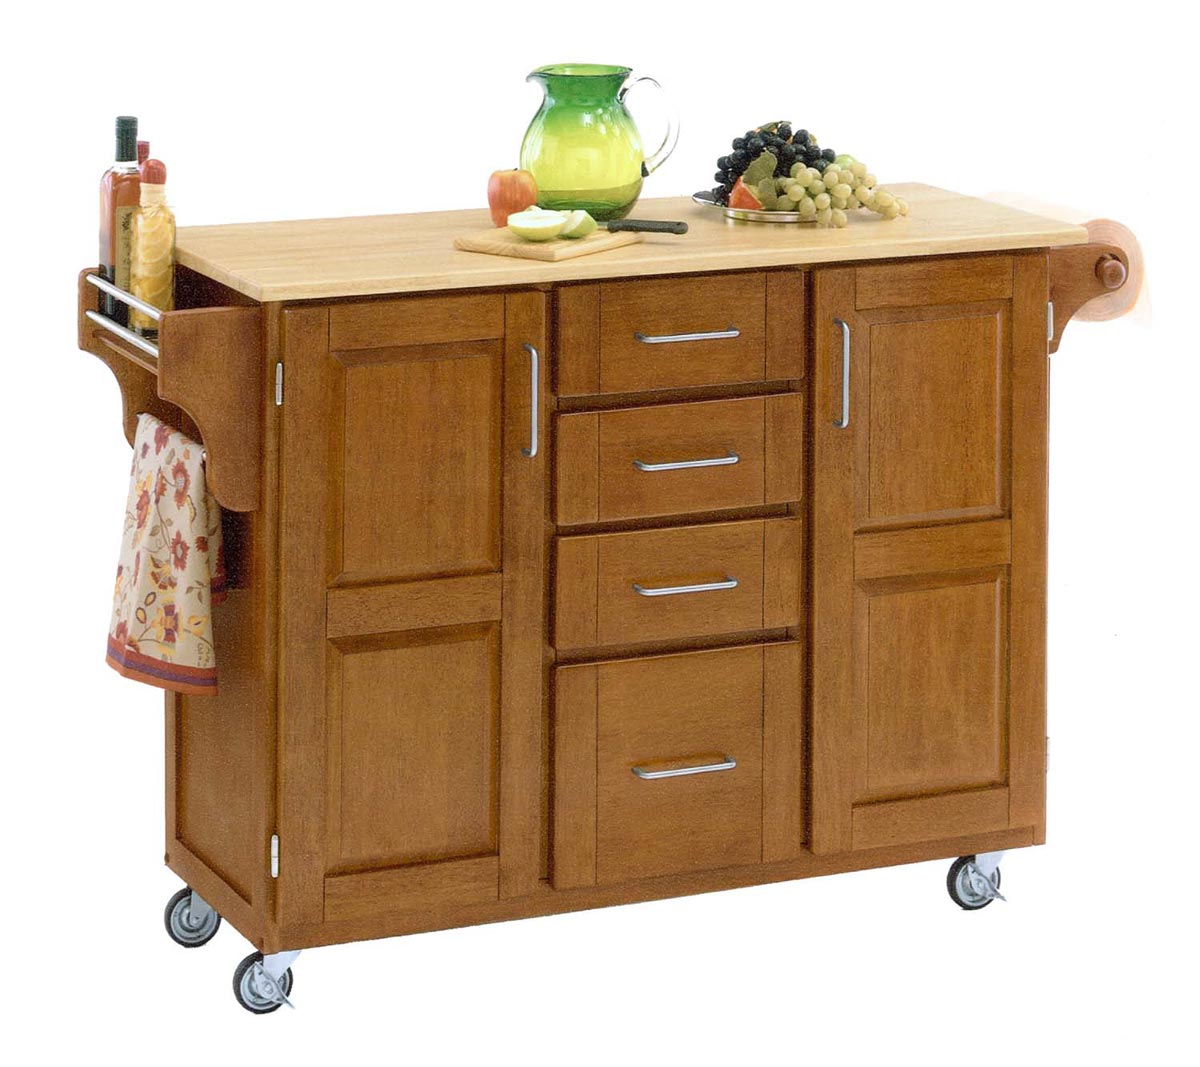 Home Styles Create-A-Cart Warm with Wood Top - Cottage Oak